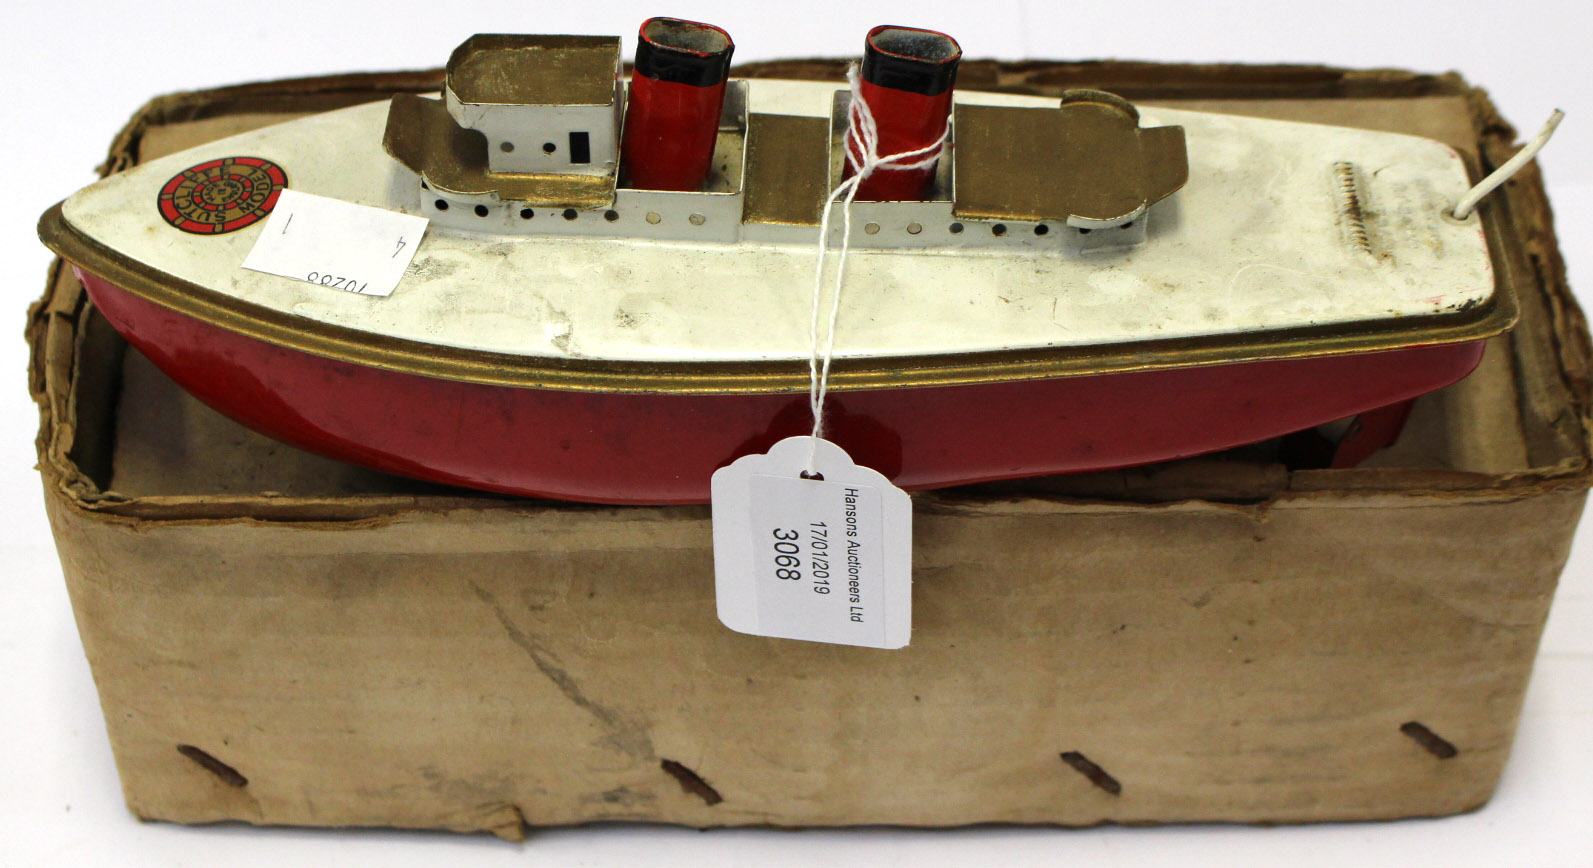 Sutcliffe Viking Steam Boat: clockwork, tinplate, working order with replacement key,